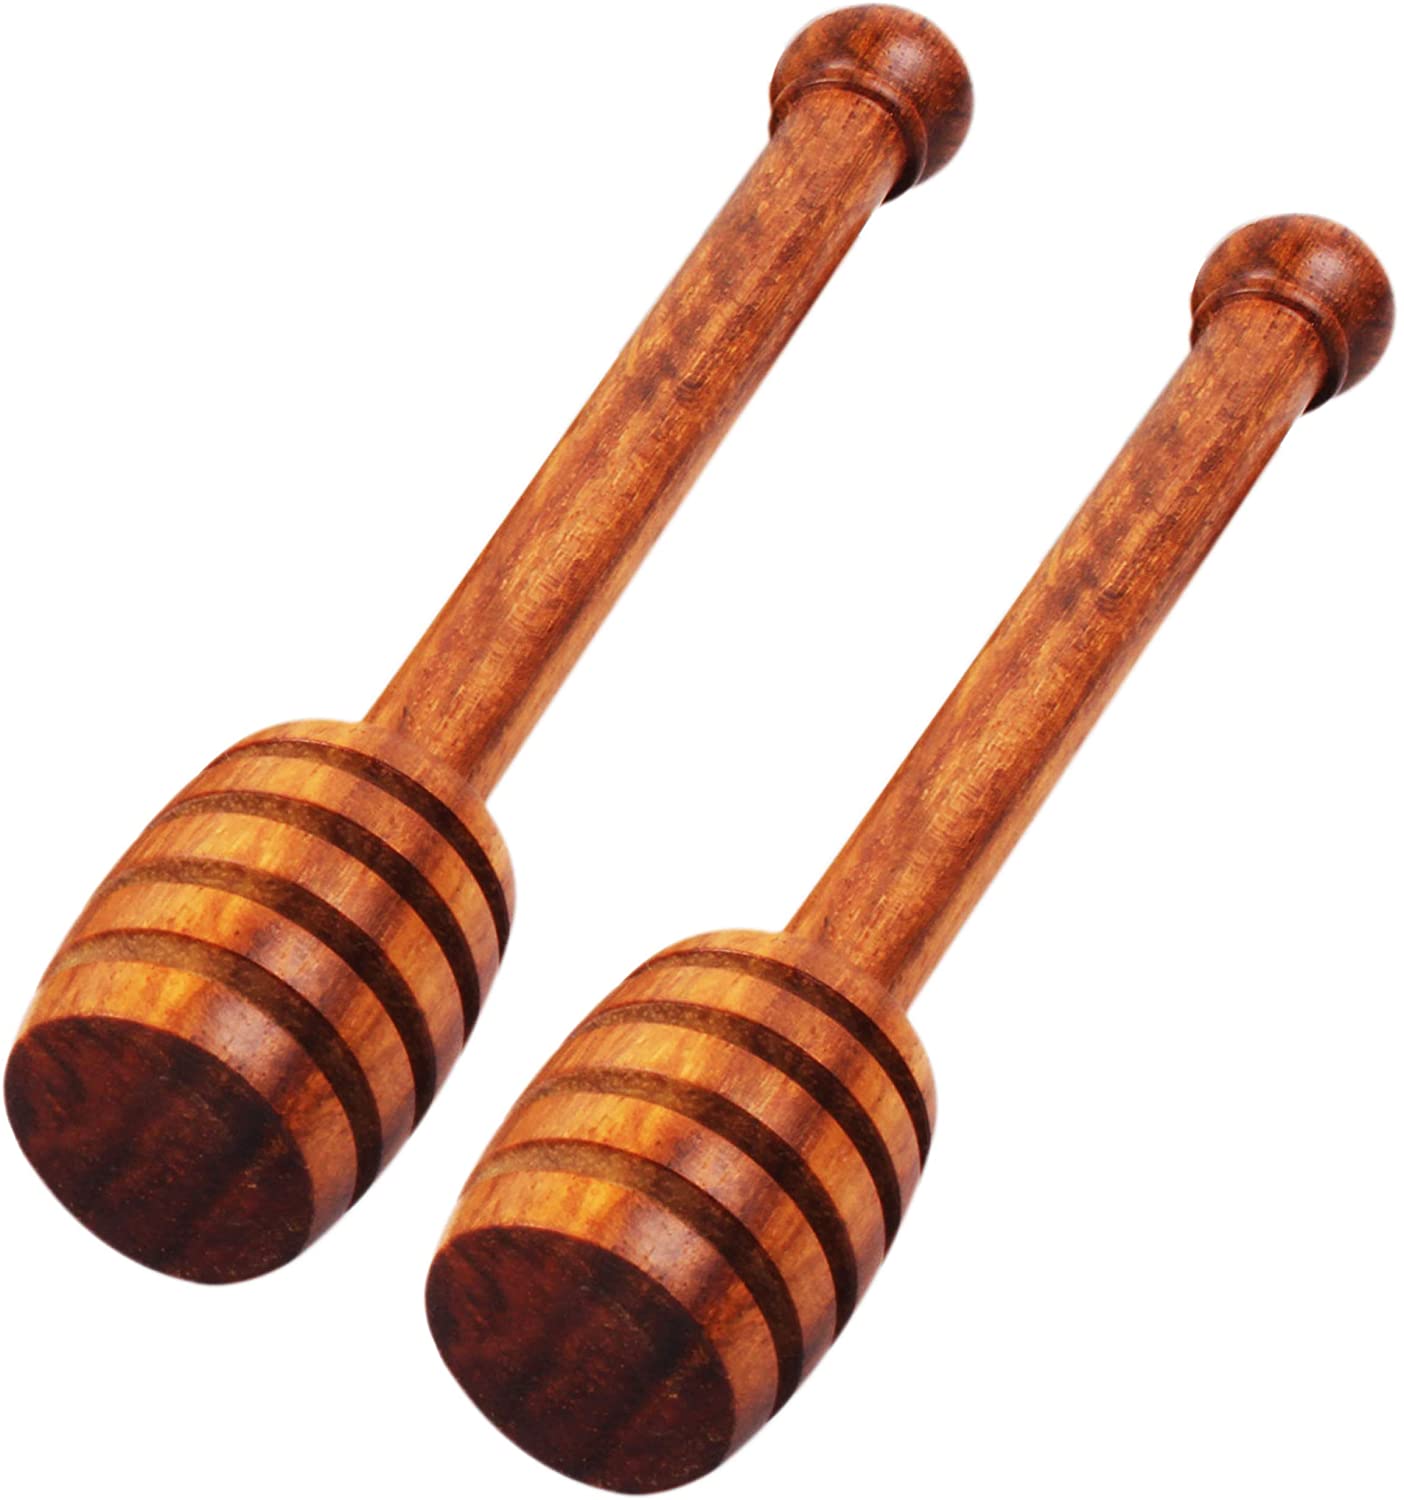 BEWBOW Gift Wooden Honey Dippers, 2-Piece